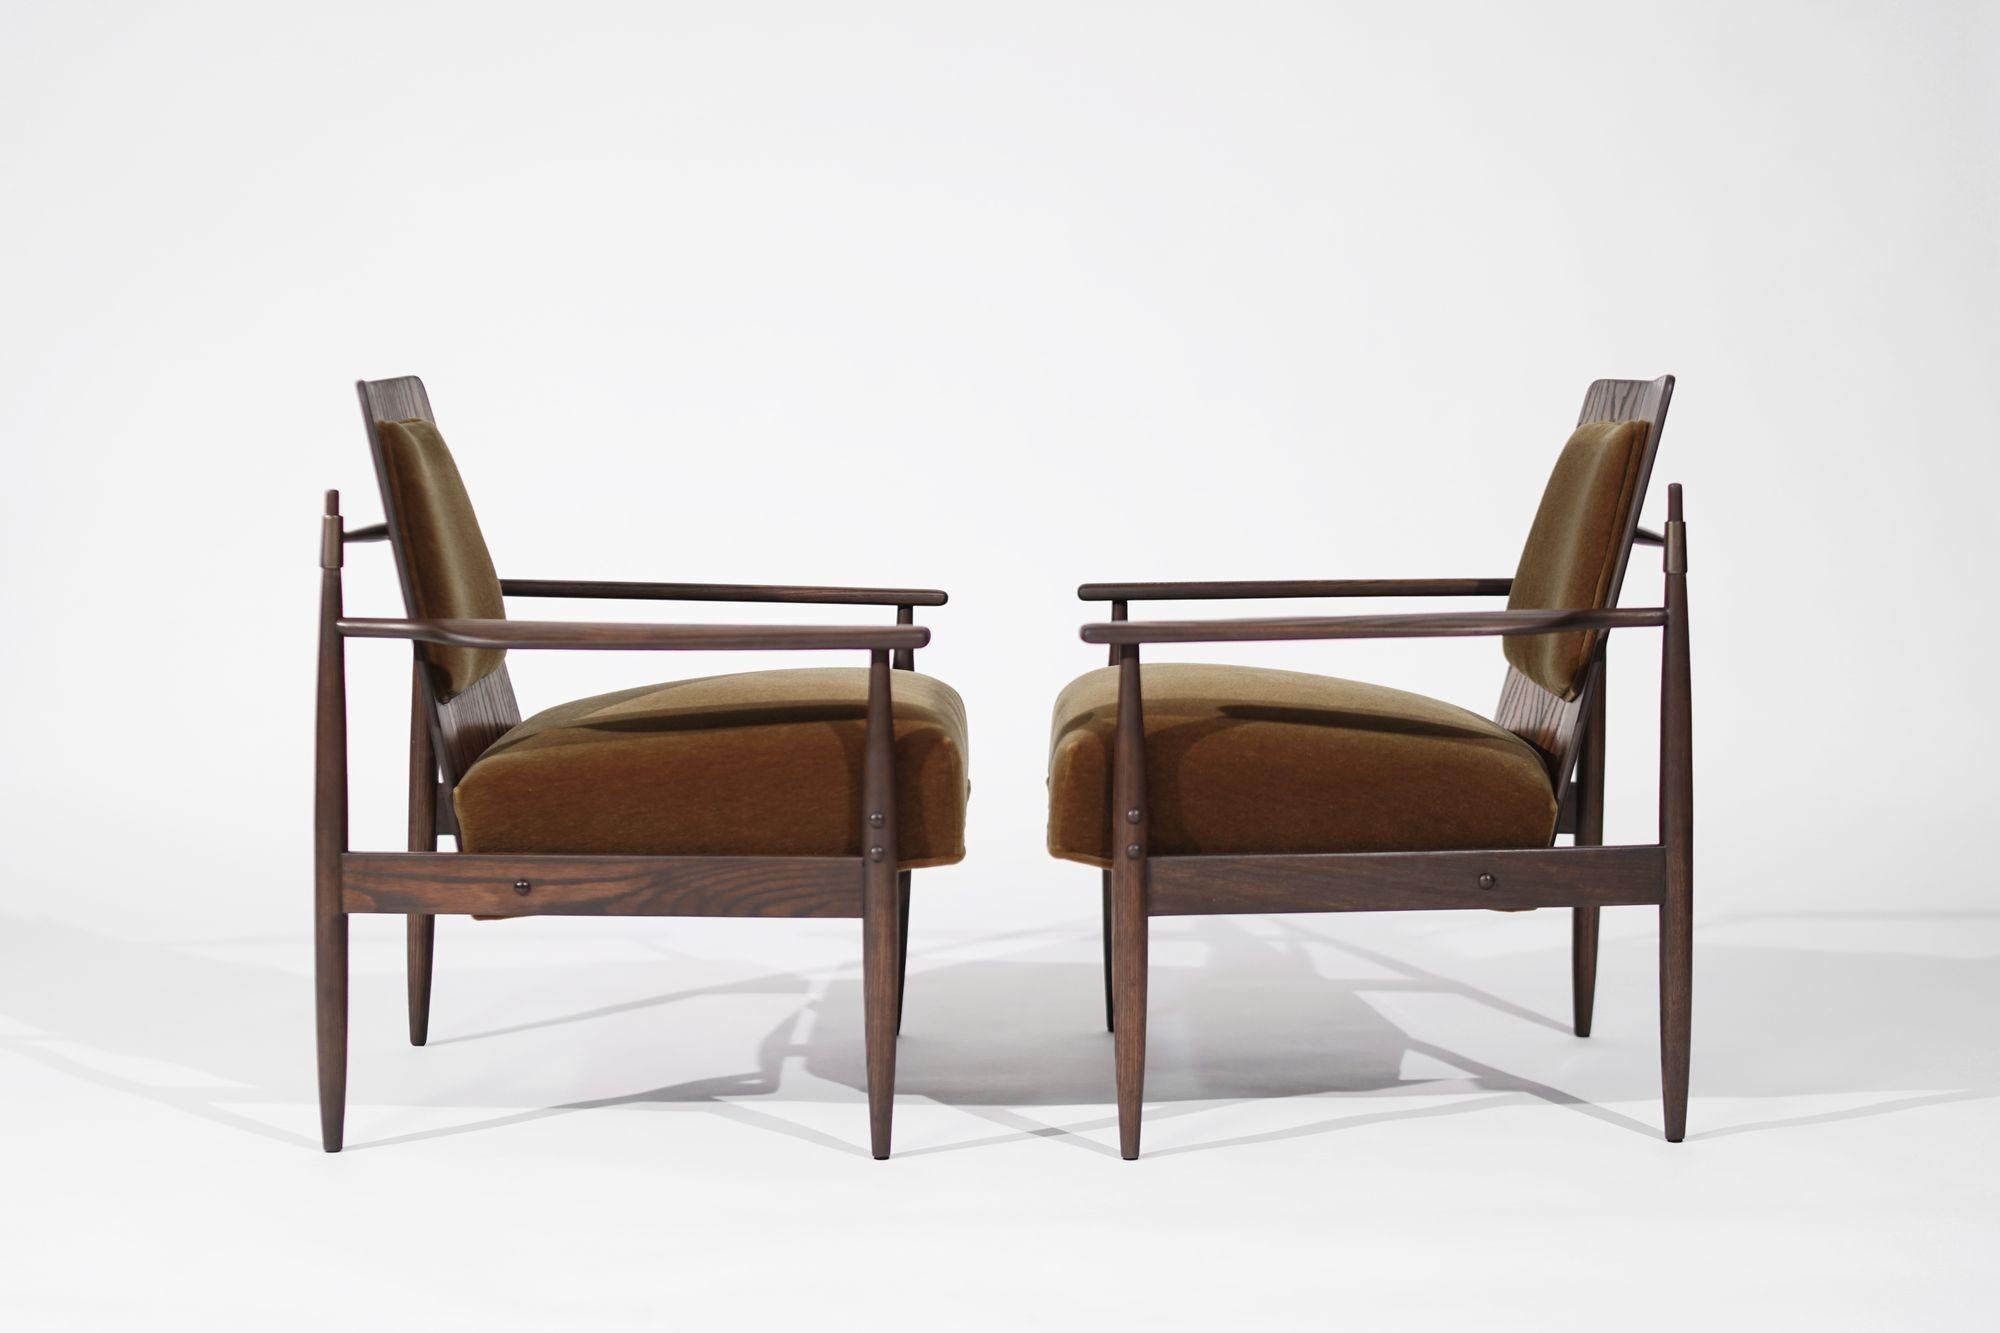 Immerse yourself in mid-century modern elegance with this exquisite pair of lounge chairs by renowned designer Dan Johnson, crafted circa 1950-1959. These chairs boast a sturdy oak framework, luxuriously soft mohair upholstery, and exquisite bronze